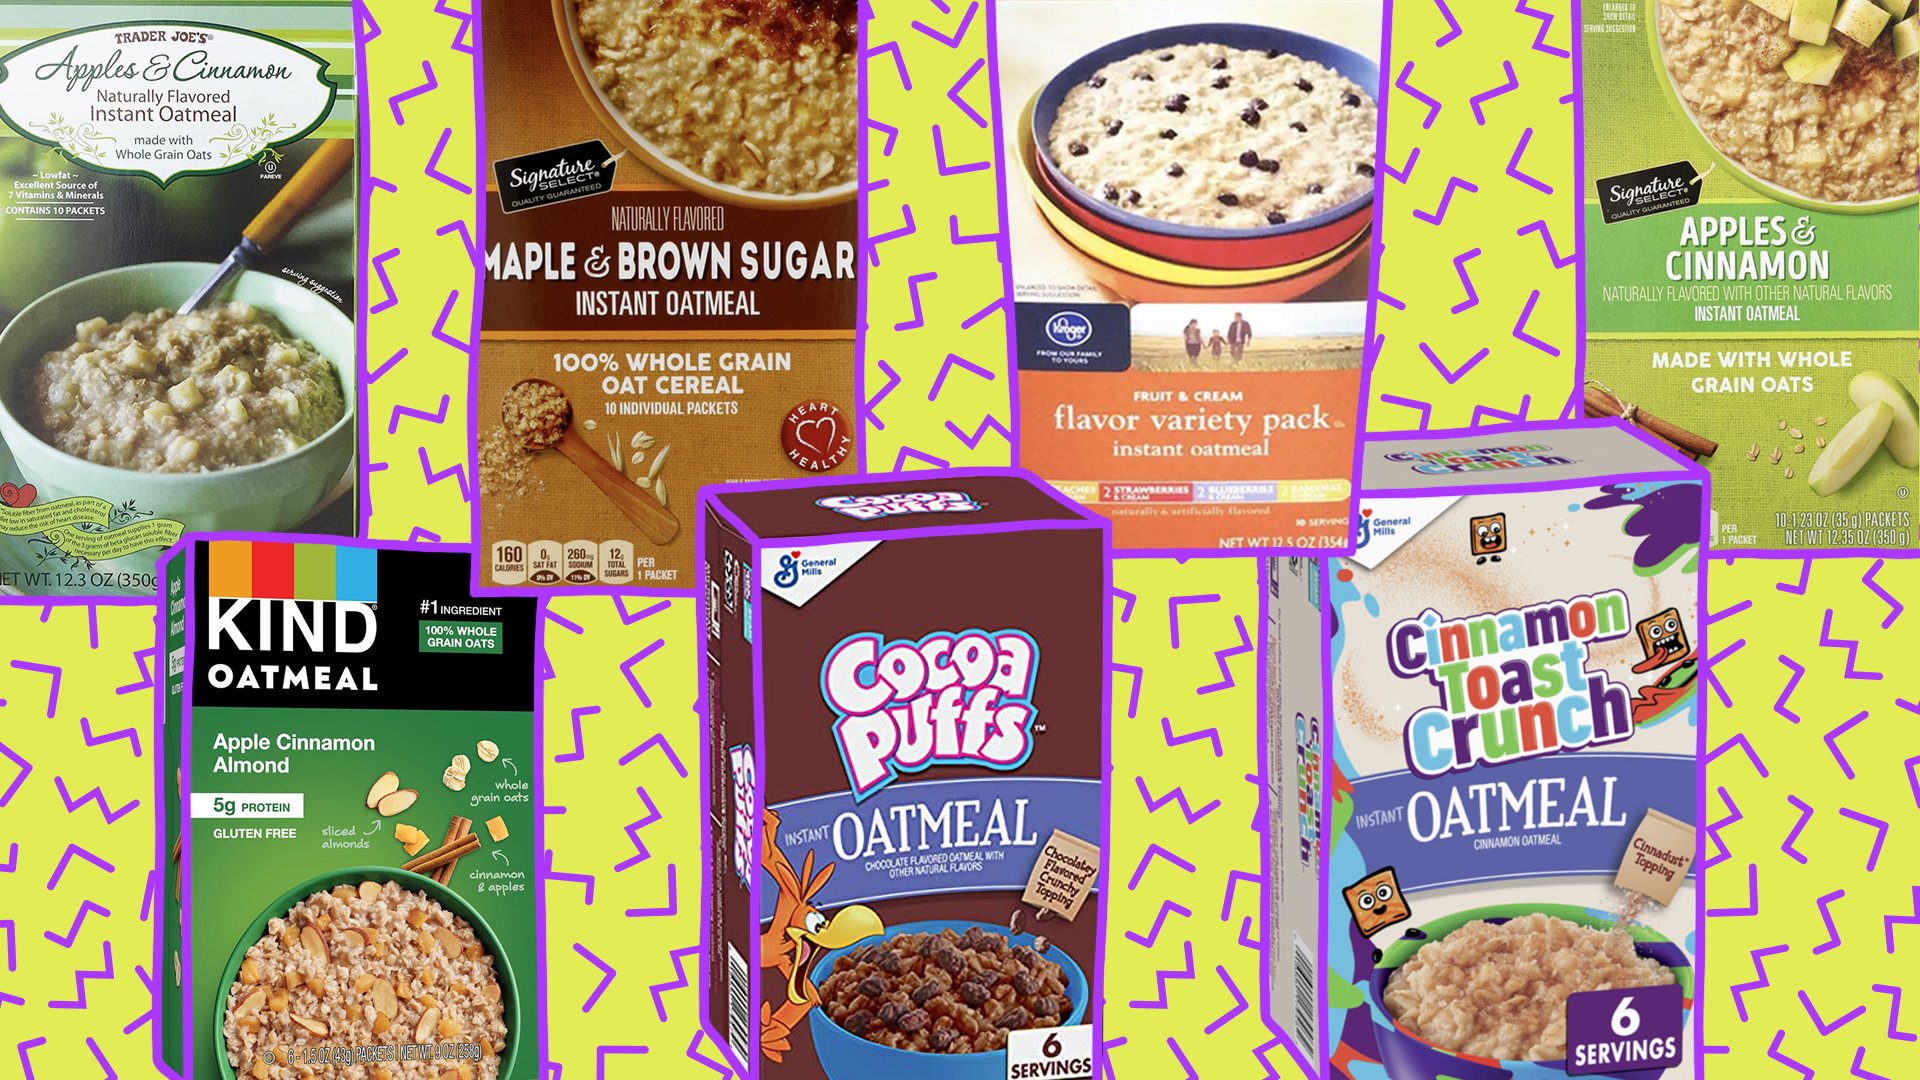 7 Best Flavored Instant Oatmeals You Can Buy